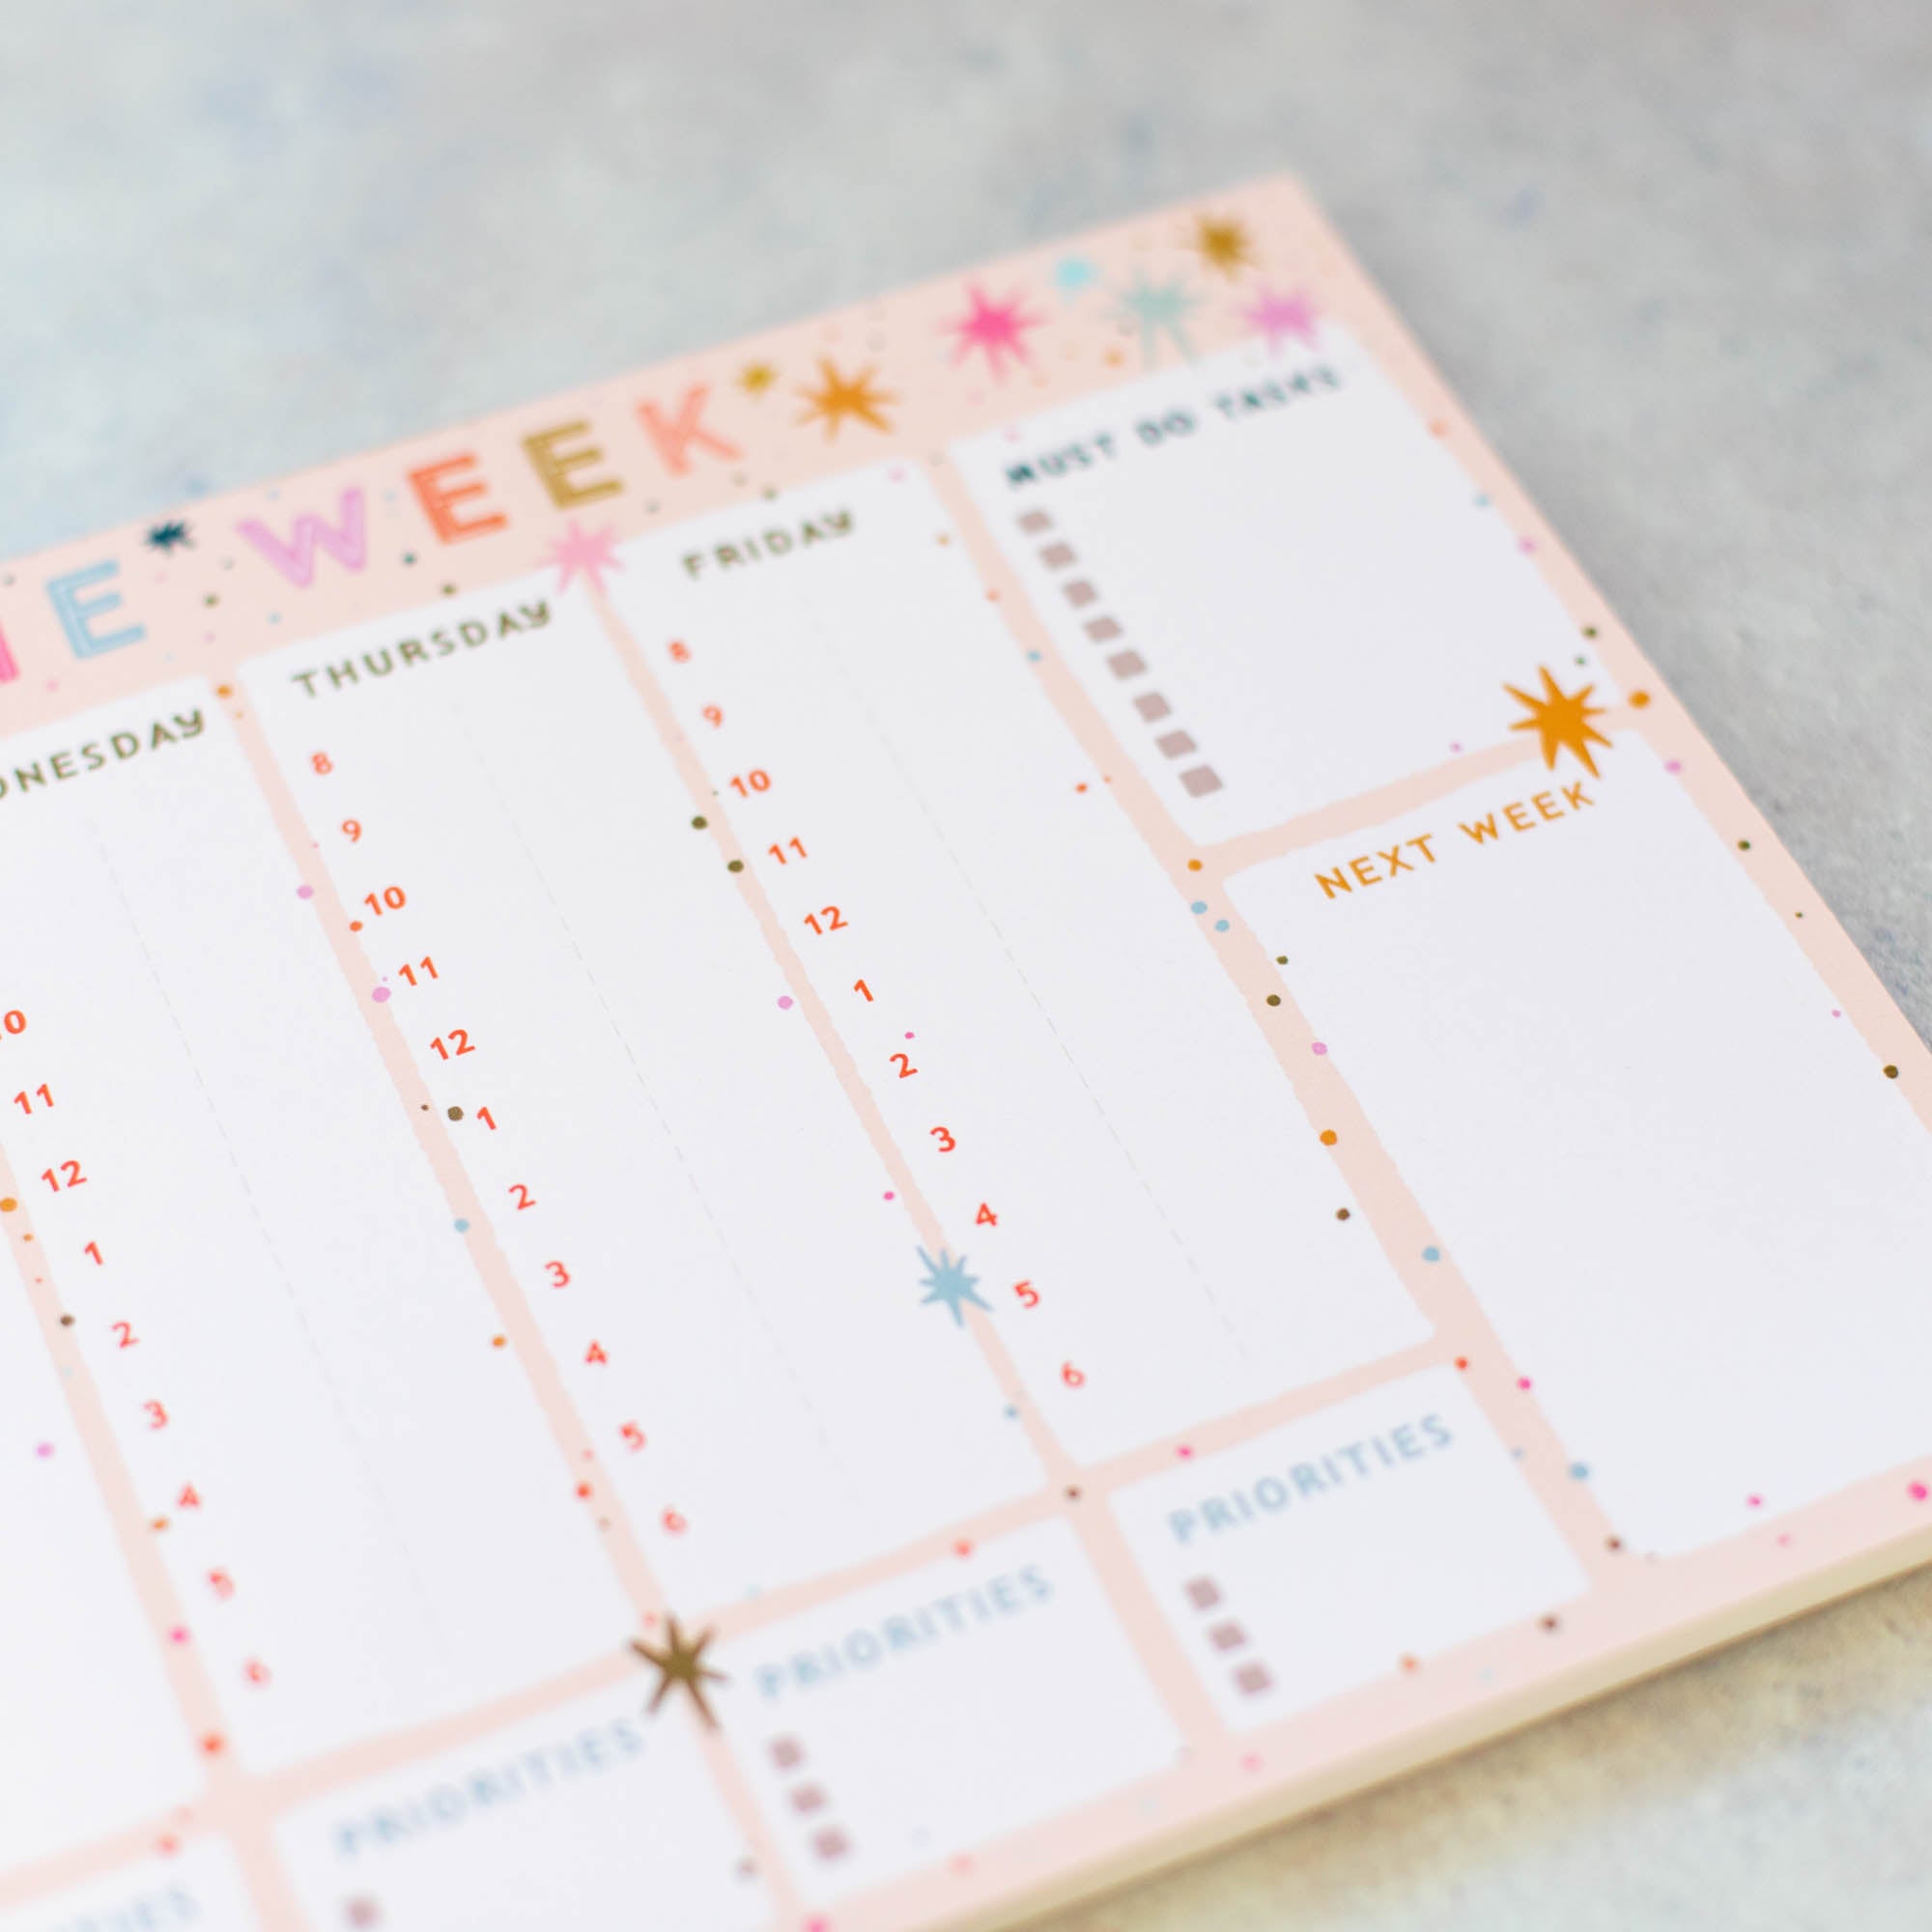 The Week A4 Planner Pad - Finest Imaginary